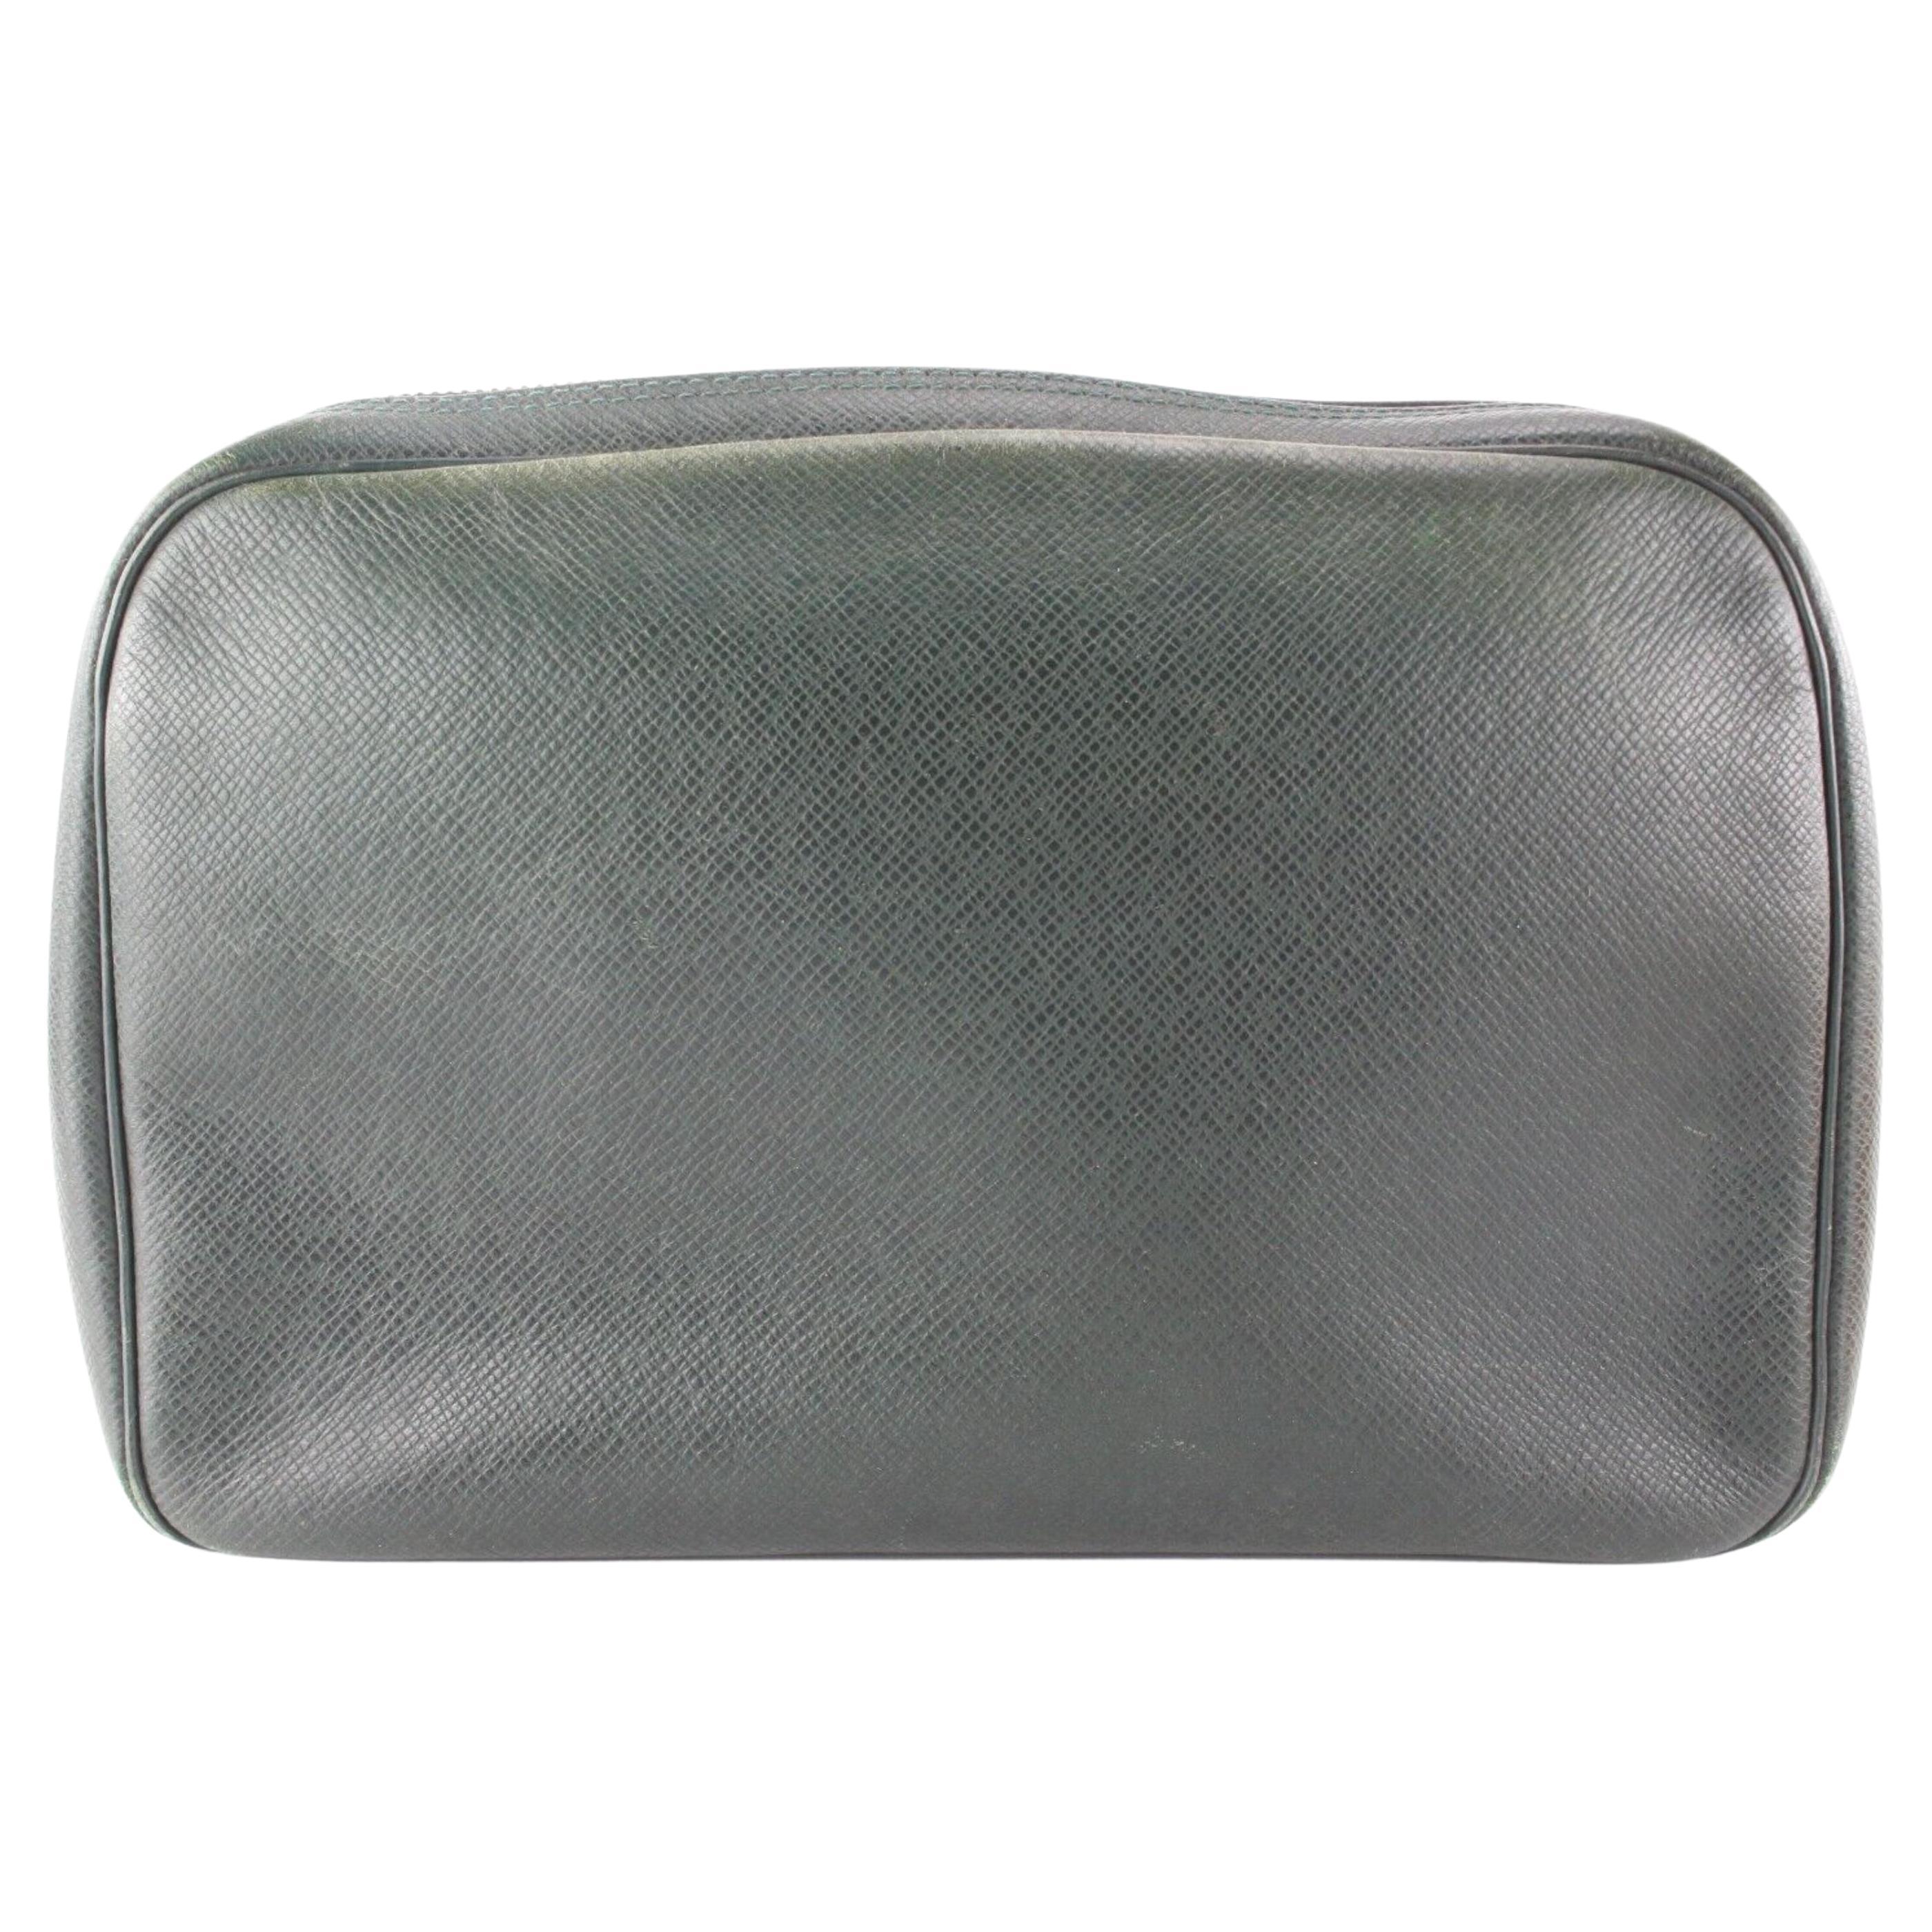 Louis Vuitton Green Taiga Leather Cosmetic Pouch Trousse 9LK0425 For Sale